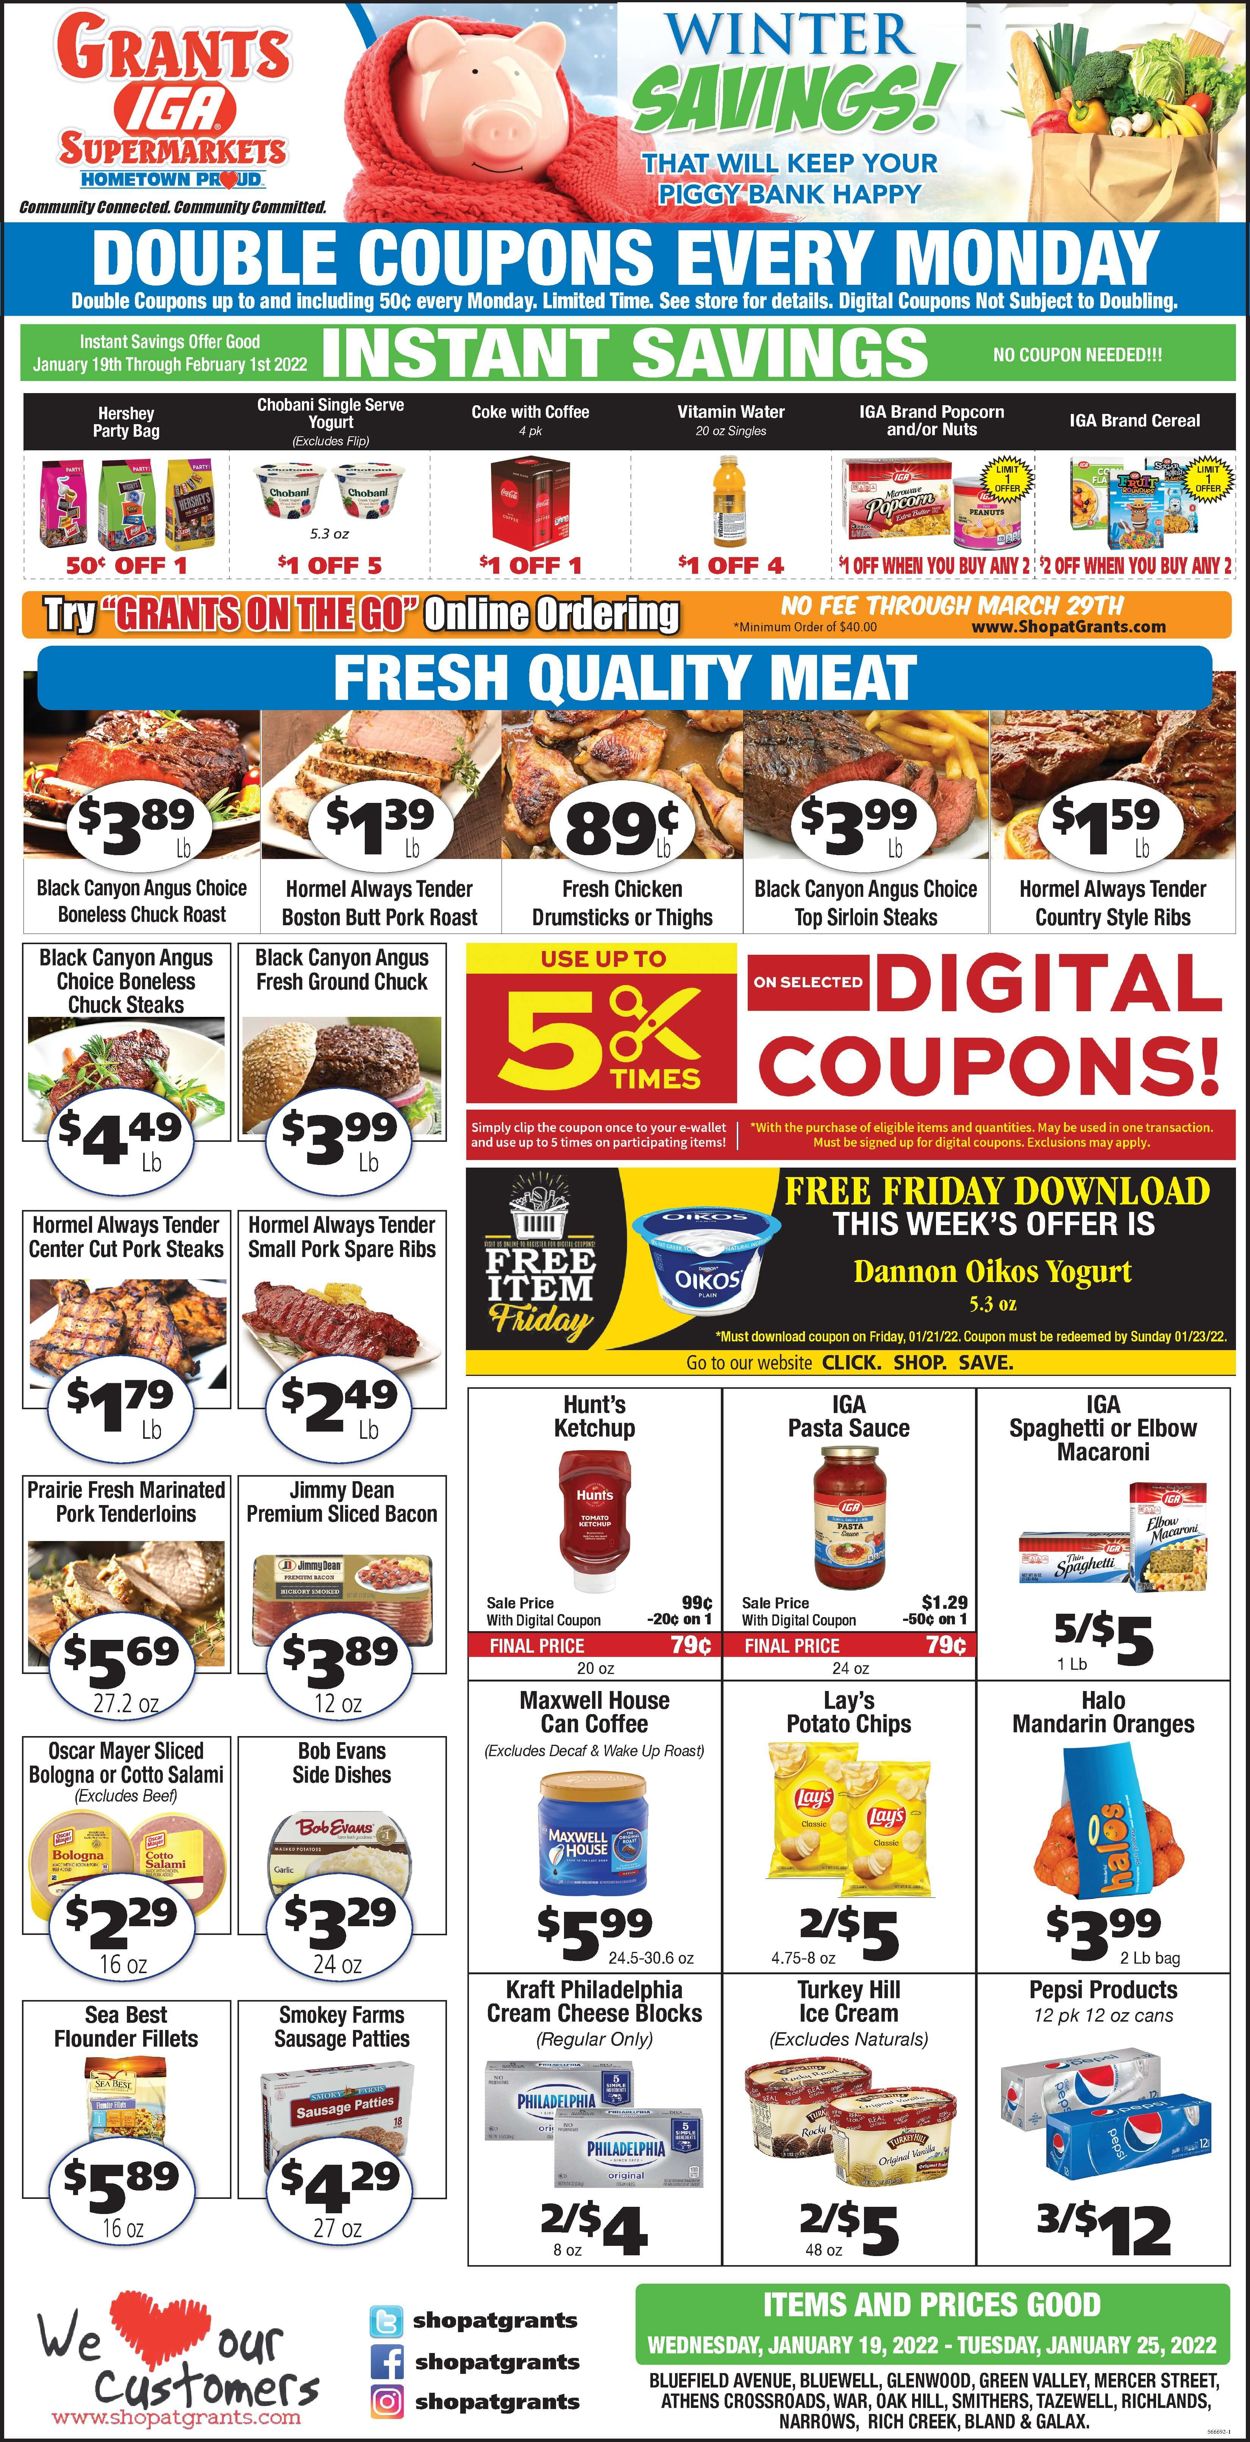 Grant's Supermarket Current weekly ad 01/19 - 01/25/2022 - frequent-ads.com